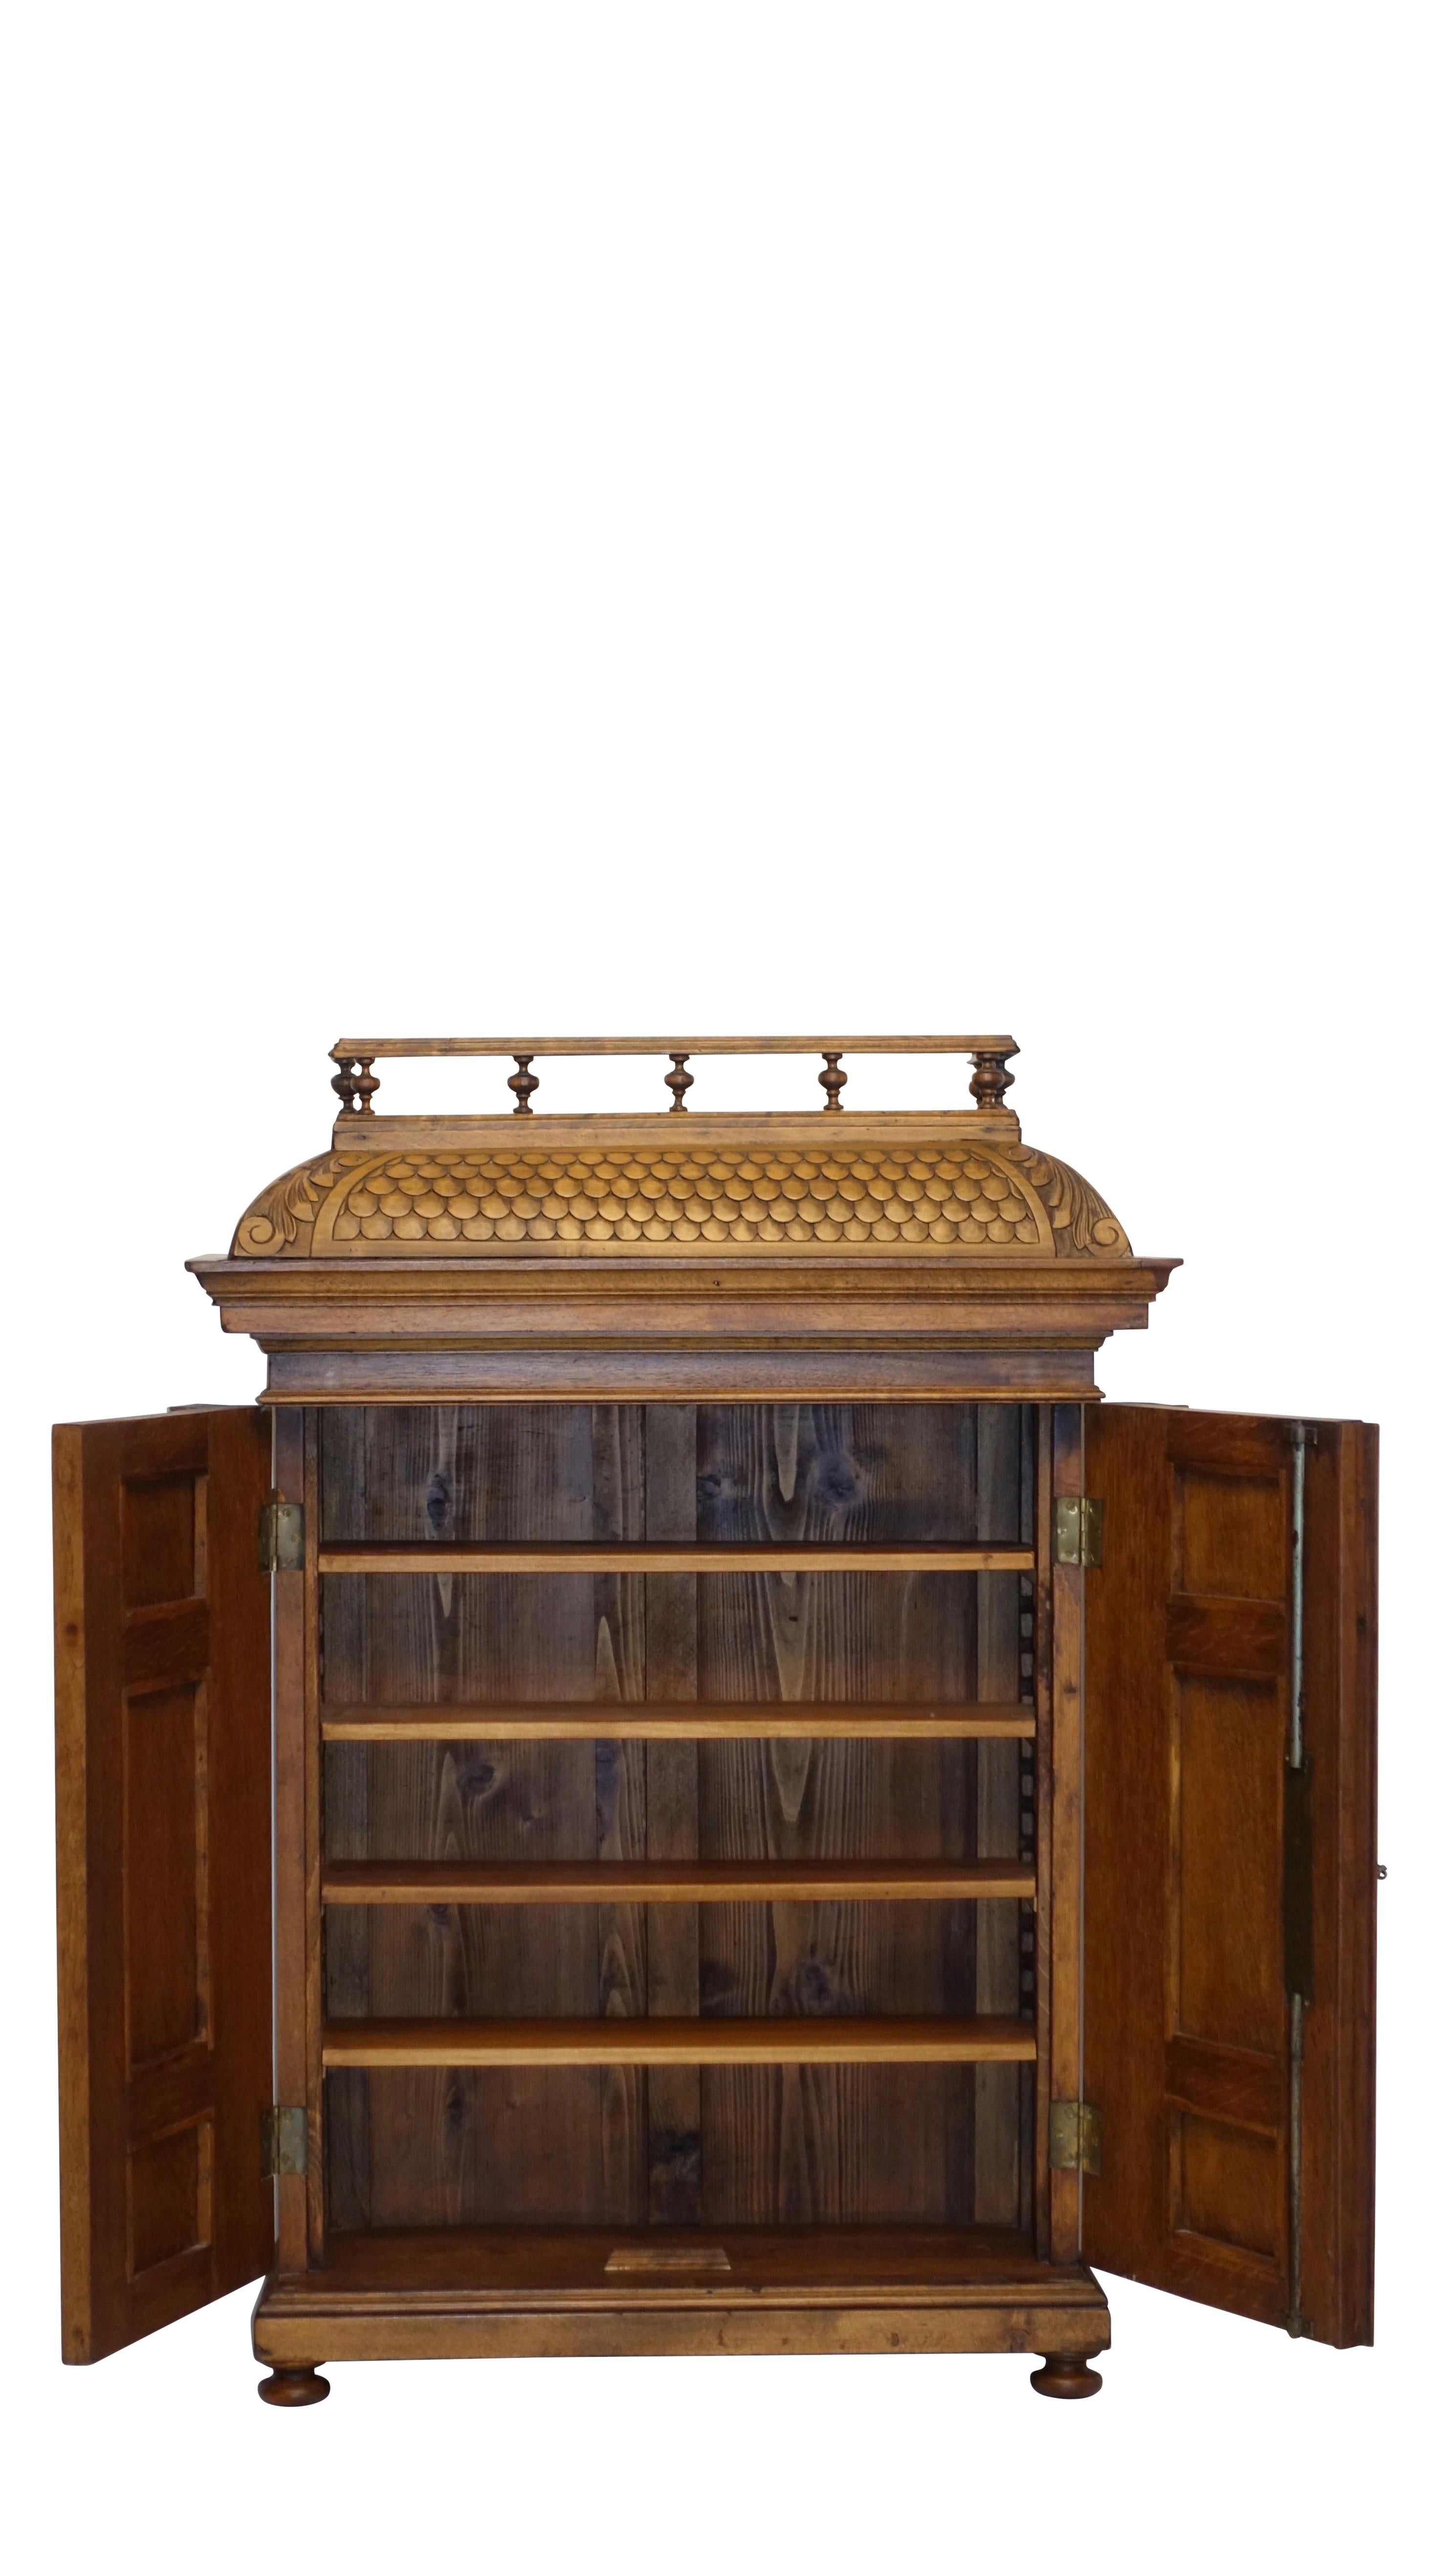 Walnut Cabinet Maker's Miniature Scale Model of a French Armoire, Late 19th Century